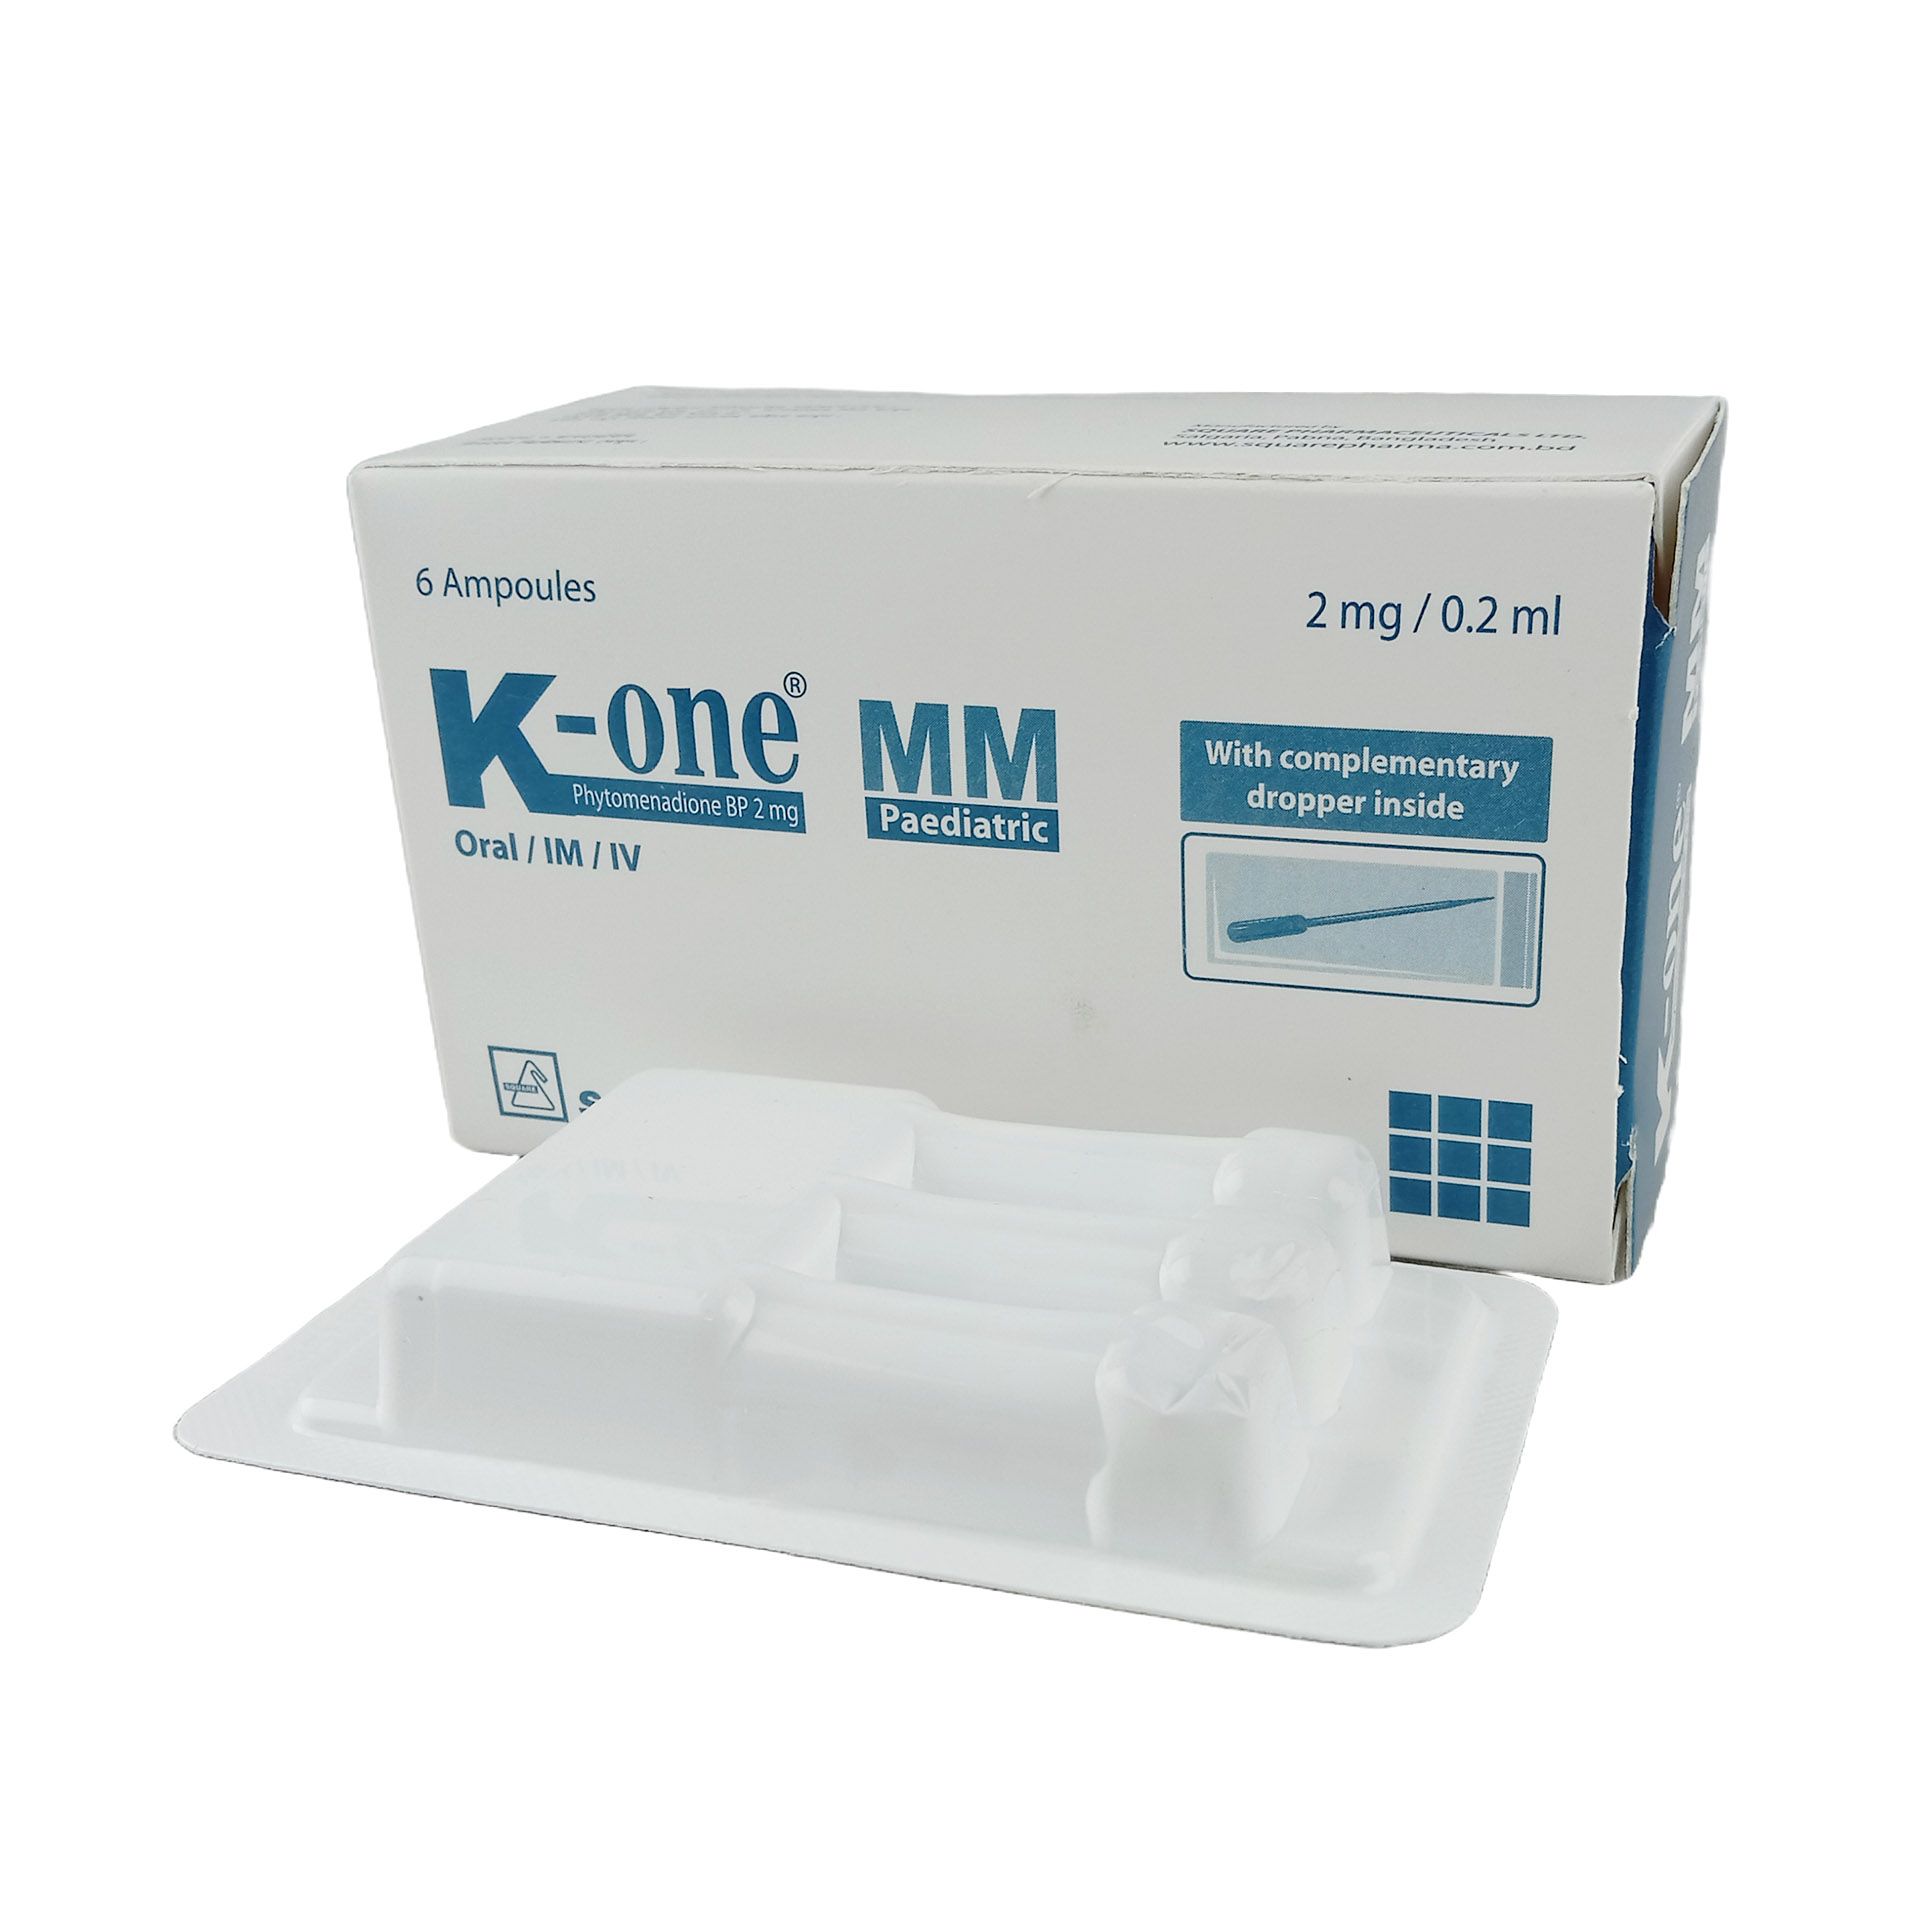 K-One MM 2mg/0.2ml Injection